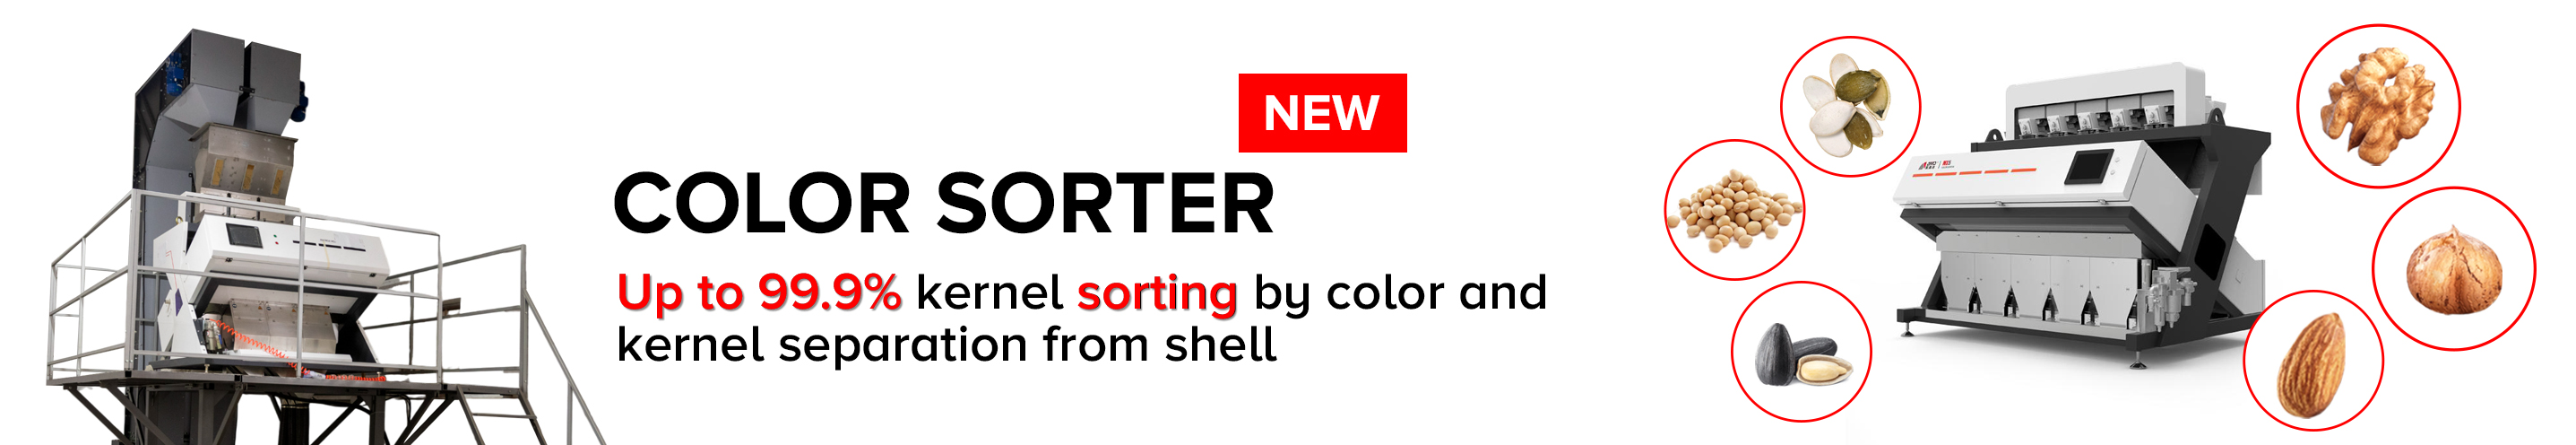 New product - color sorter for sorting bulk products